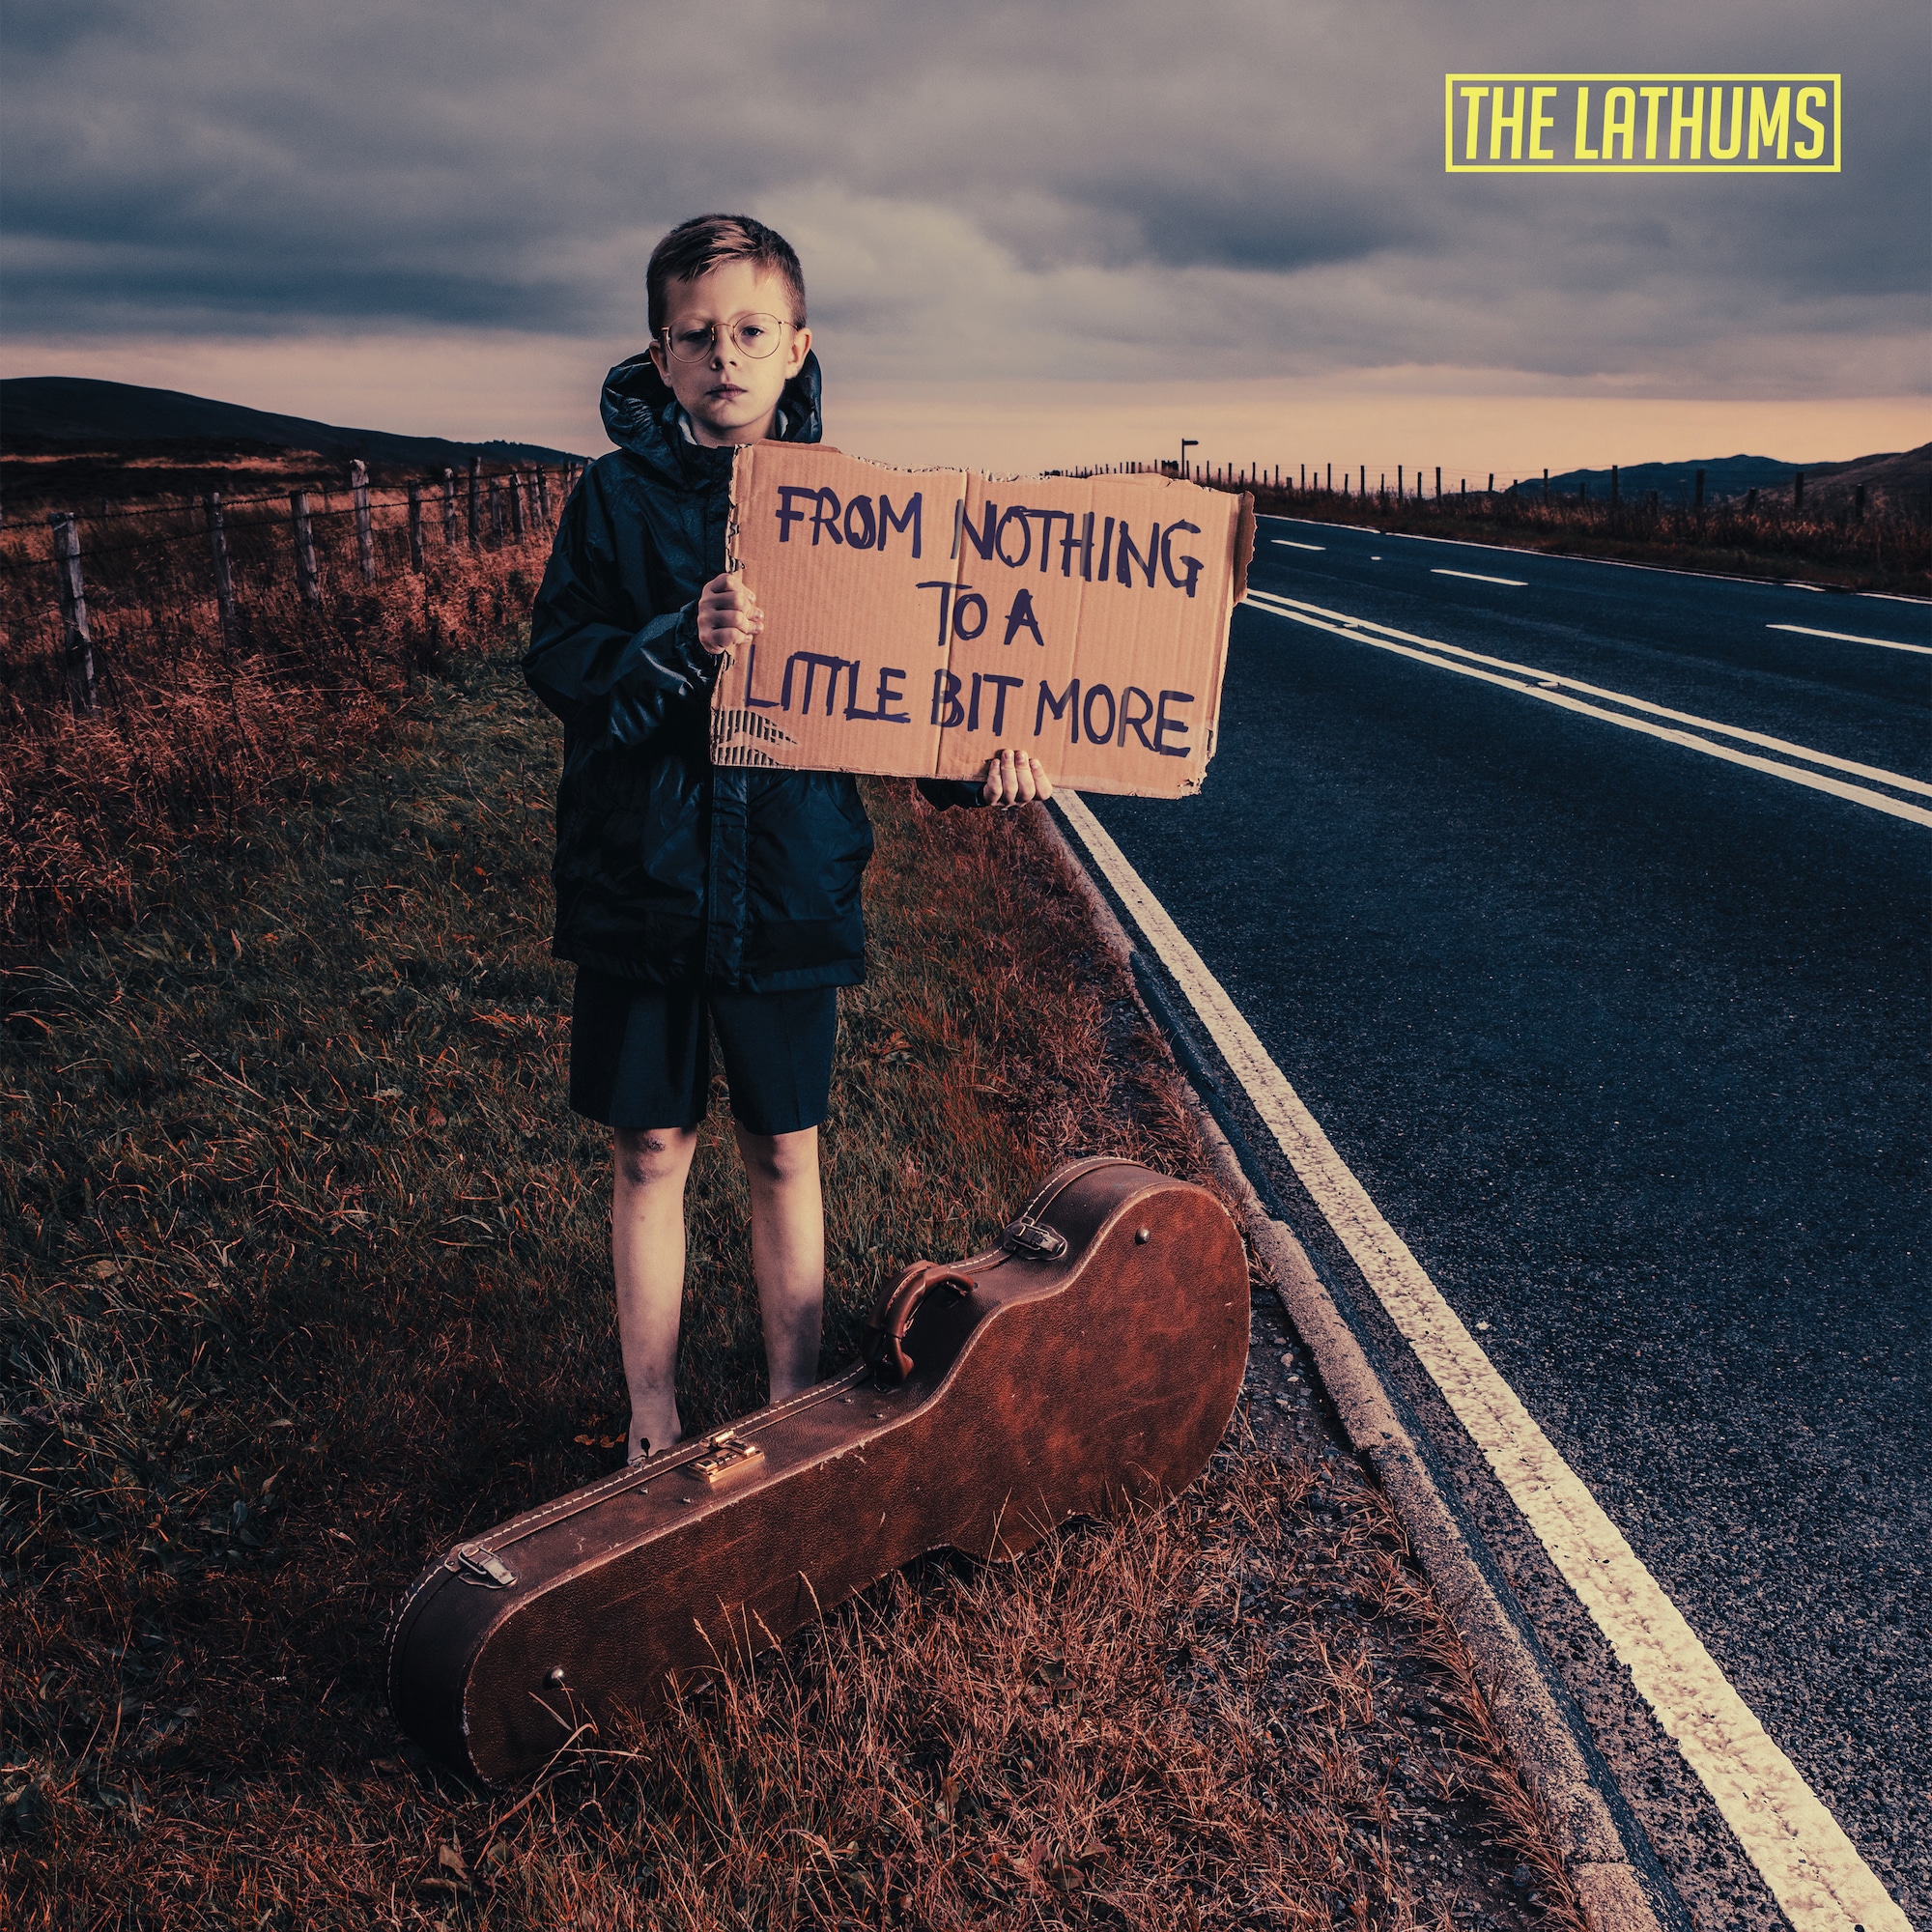 THE LATHUMS -From Nothing To A Little Bit More